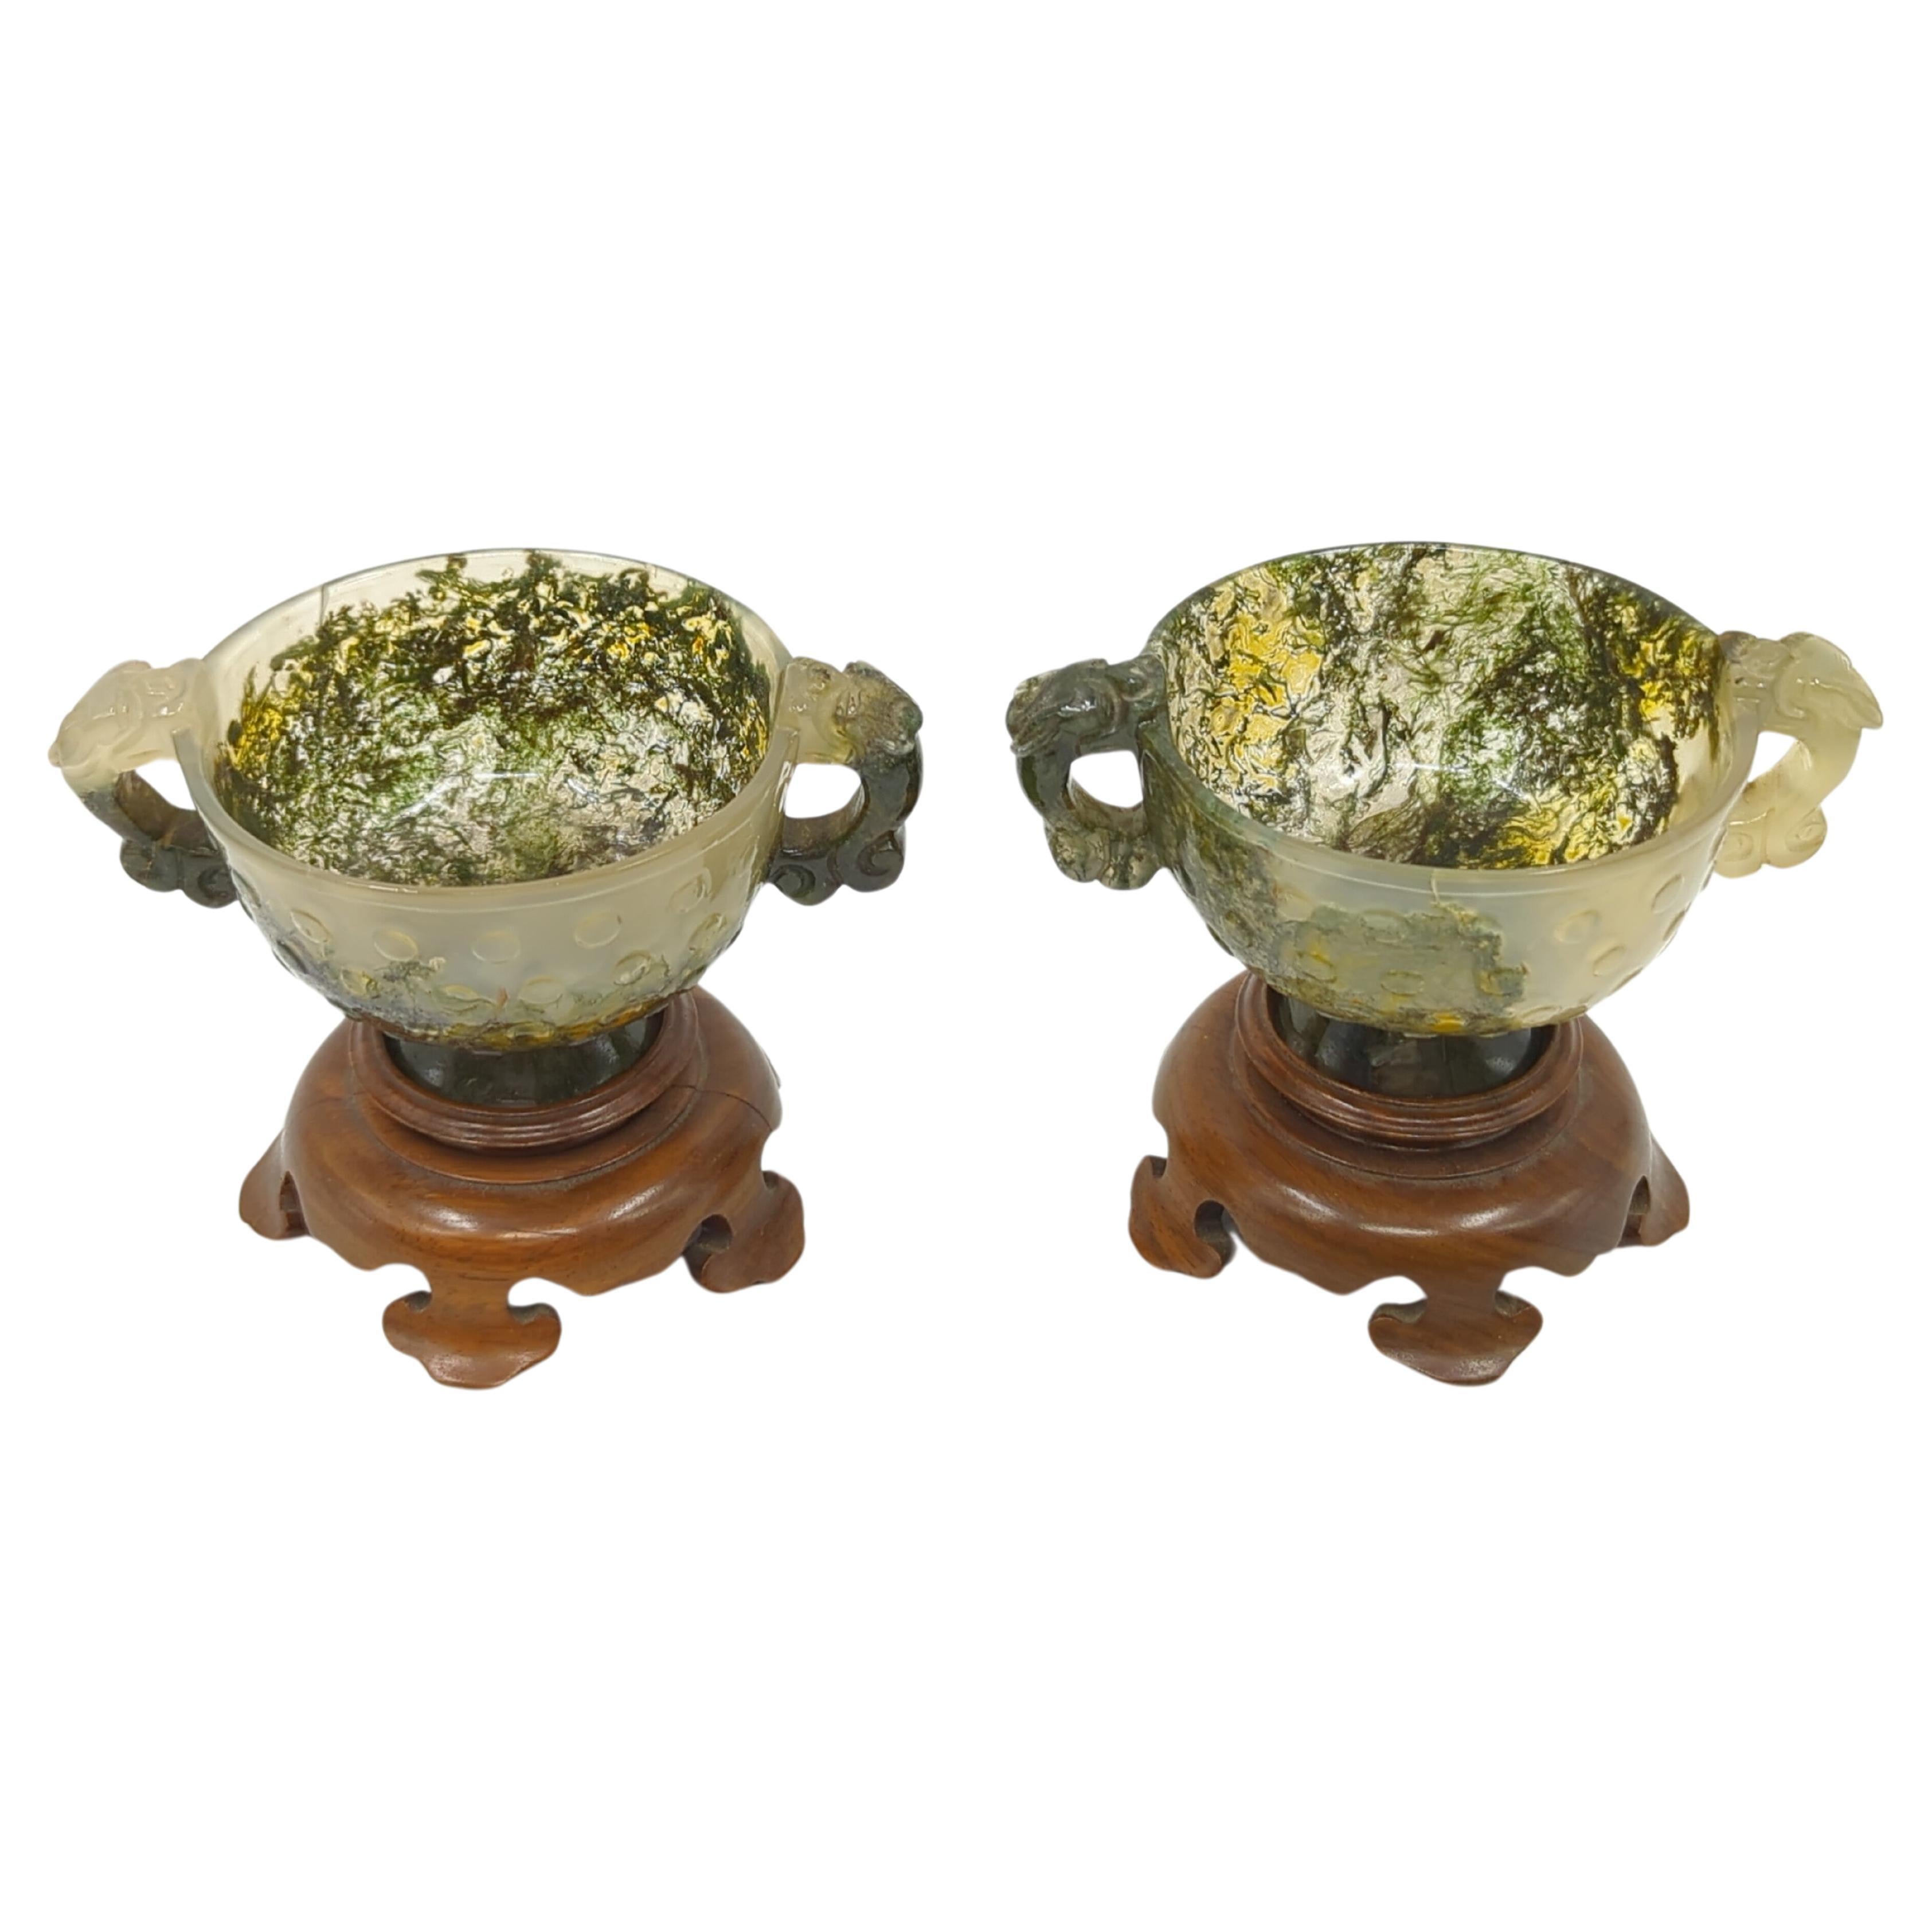 Antique Chinese Carved Moss Agate Cups Qilin Handles Hardwood Stands Qing 18/19c For Sale 6